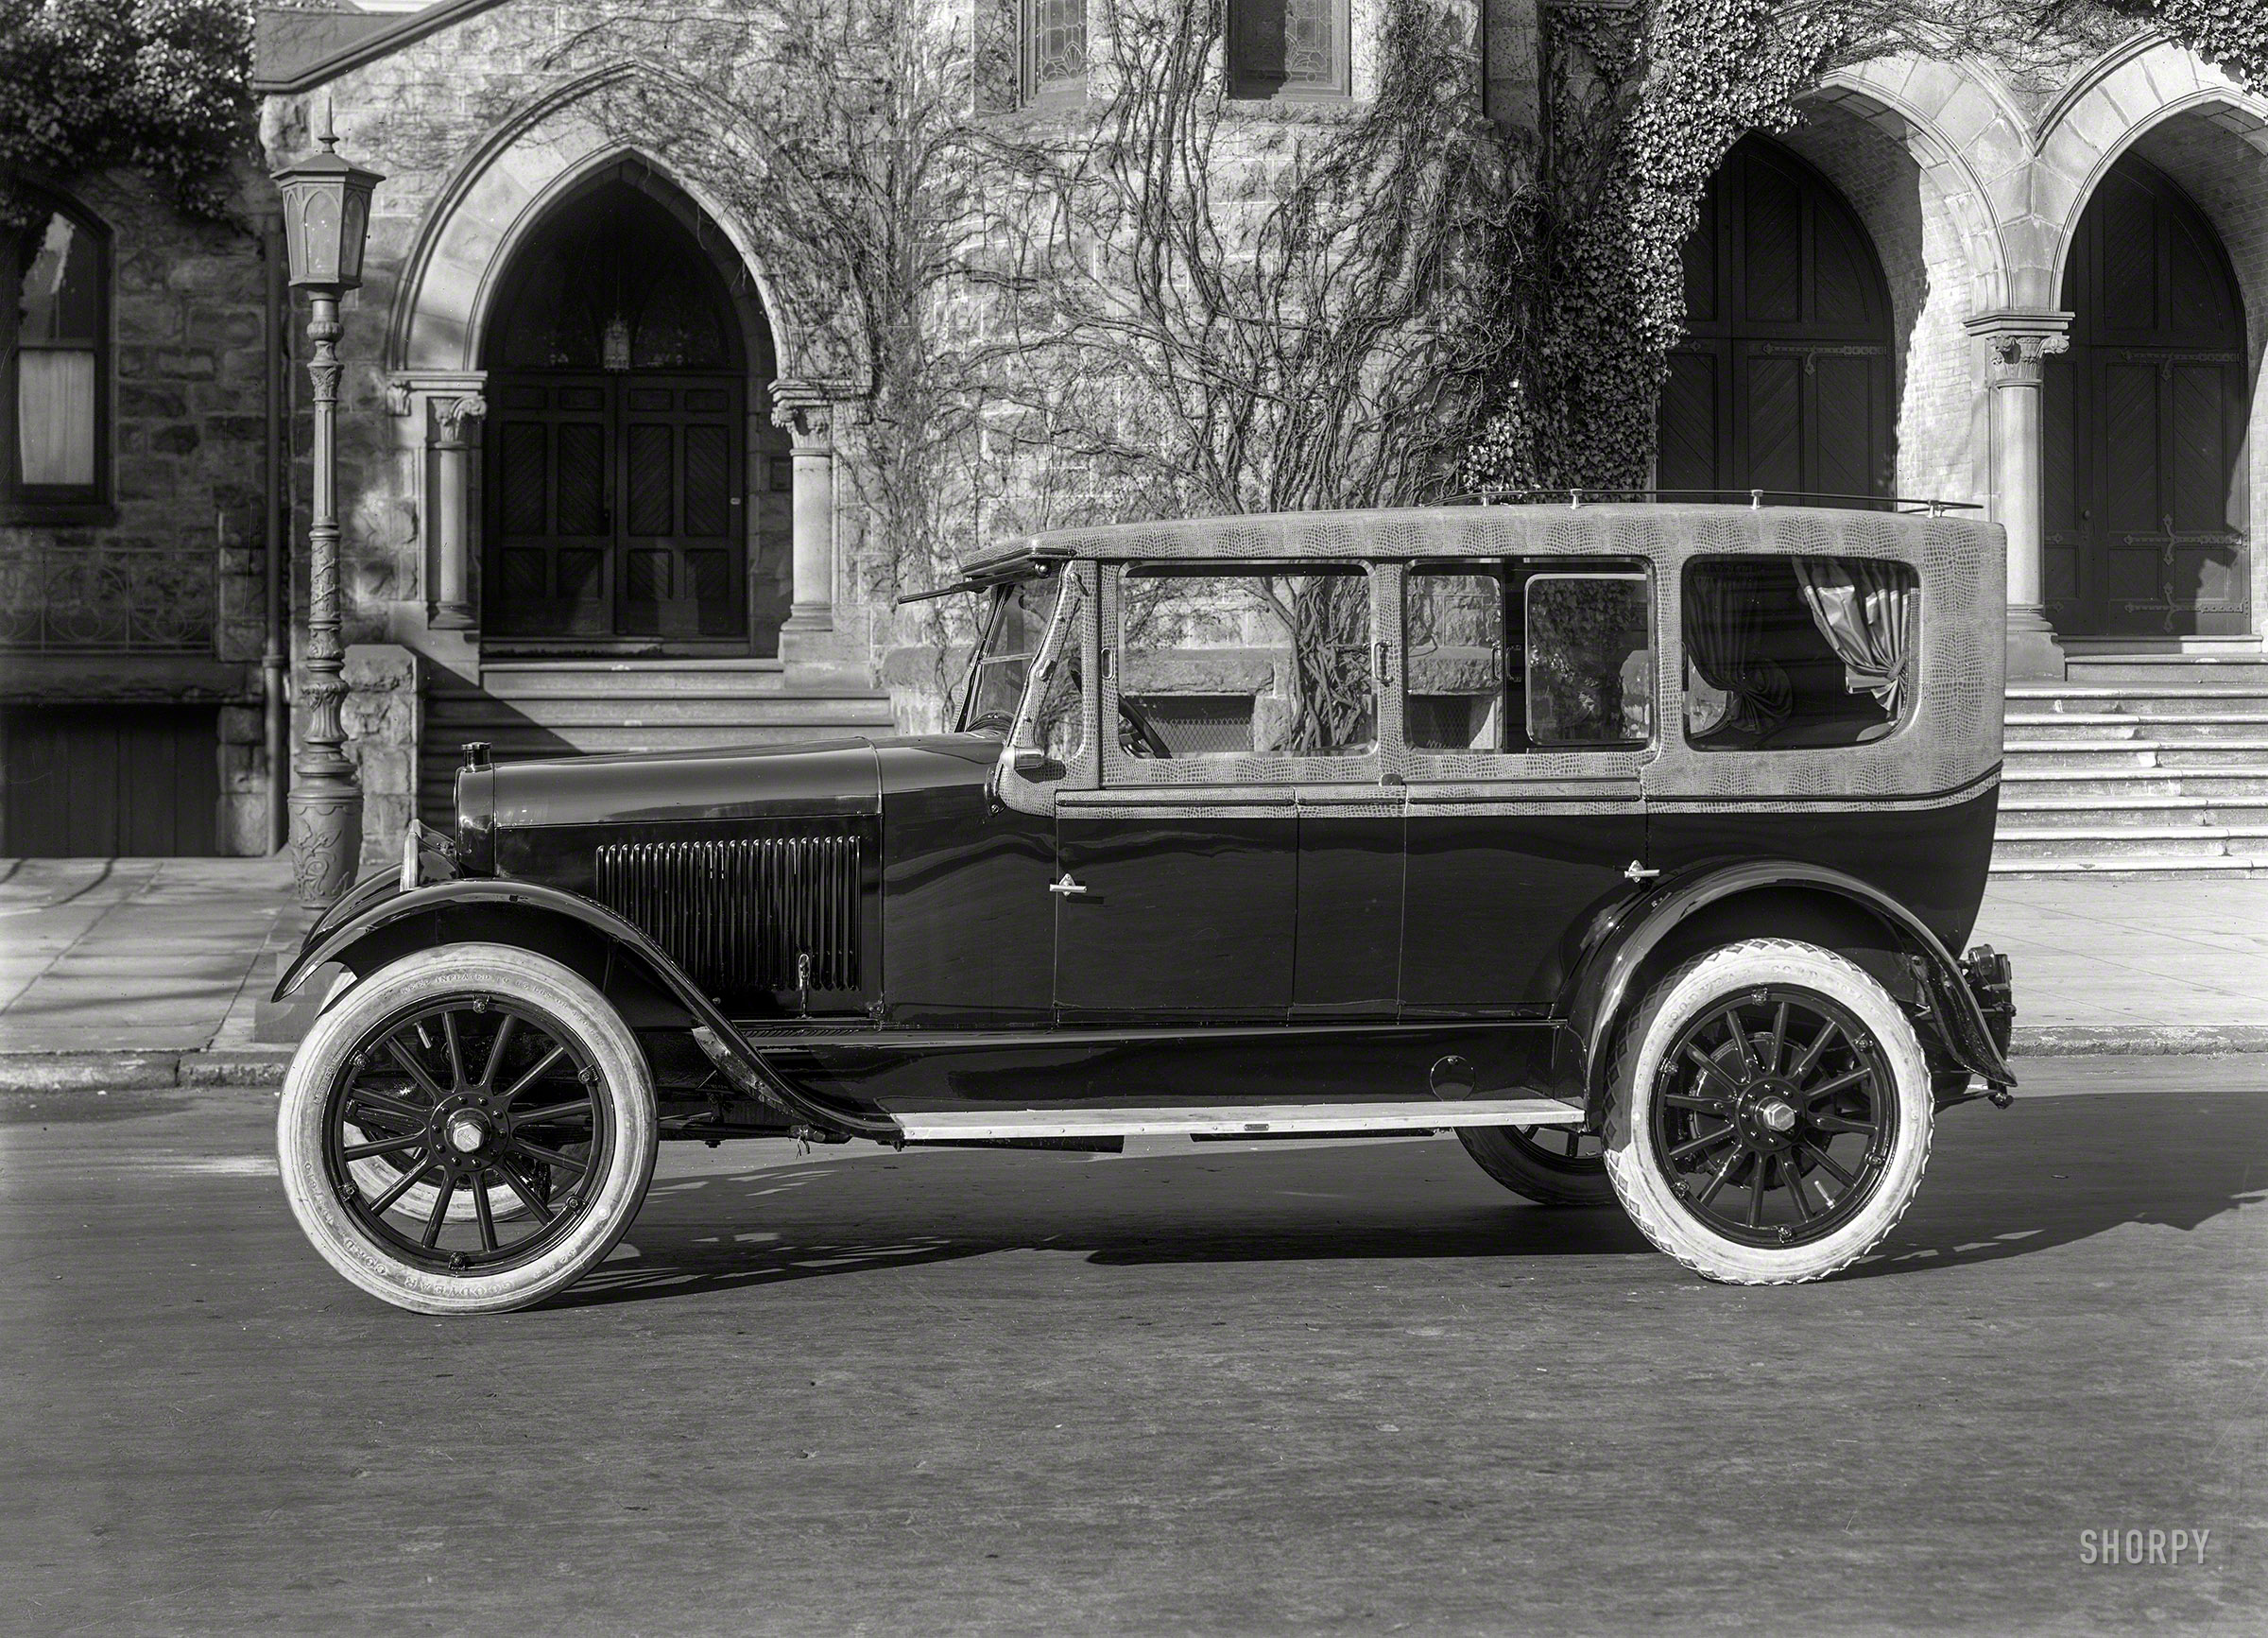 San Francisco circa 1921. "Chalmers Six touring car." Fitted with a reptilian custom top. 5x7 glass negative by Christopher Helin. View full size.